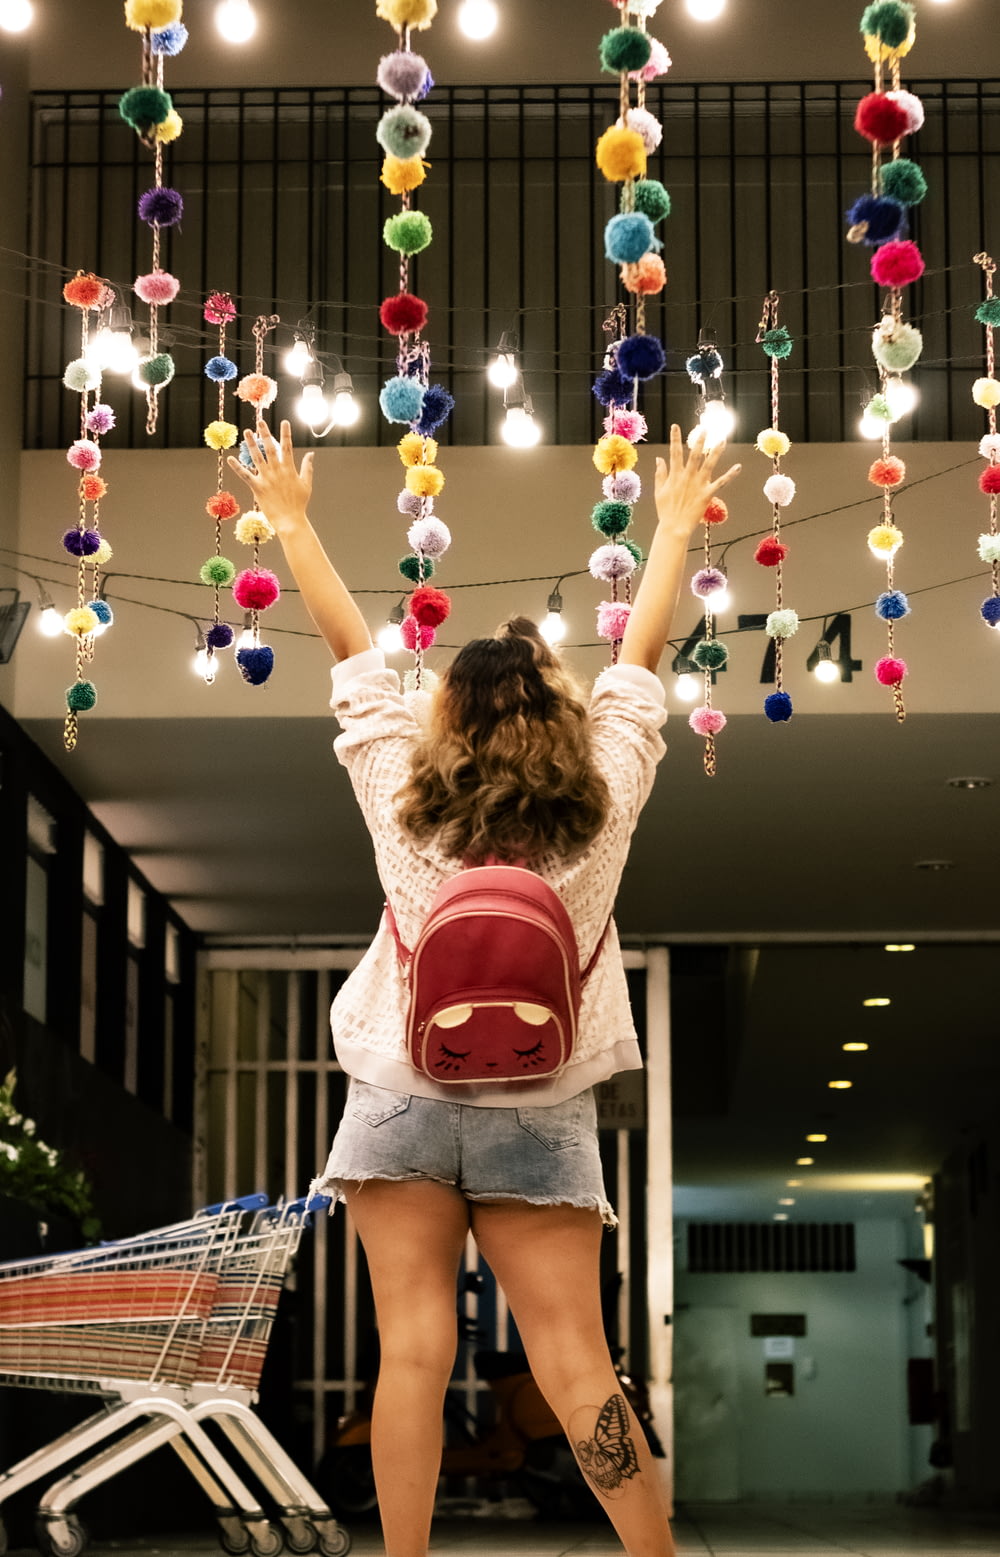 woman in red crop top and blue denim shorts standing near balloons